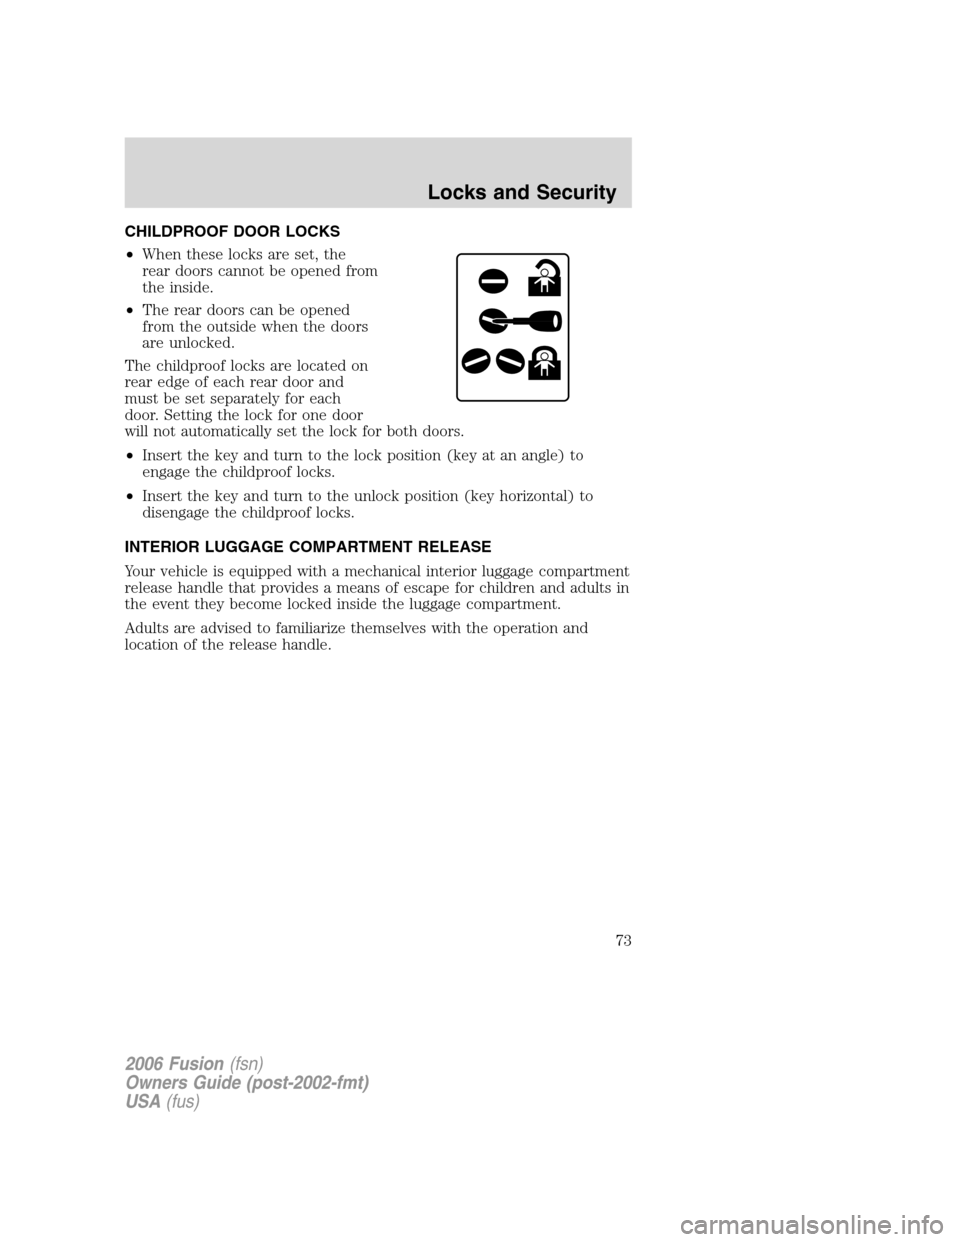 FORD FUSION (AMERICAS) 2006 1.G Manual PDF CHILDPROOF DOOR LOCKS
•When these locks are set, the
rear doors cannot be opened from
the inside.
•The rear doors can be opened
from the outside when the doors
are unlocked.
The childproof locks a